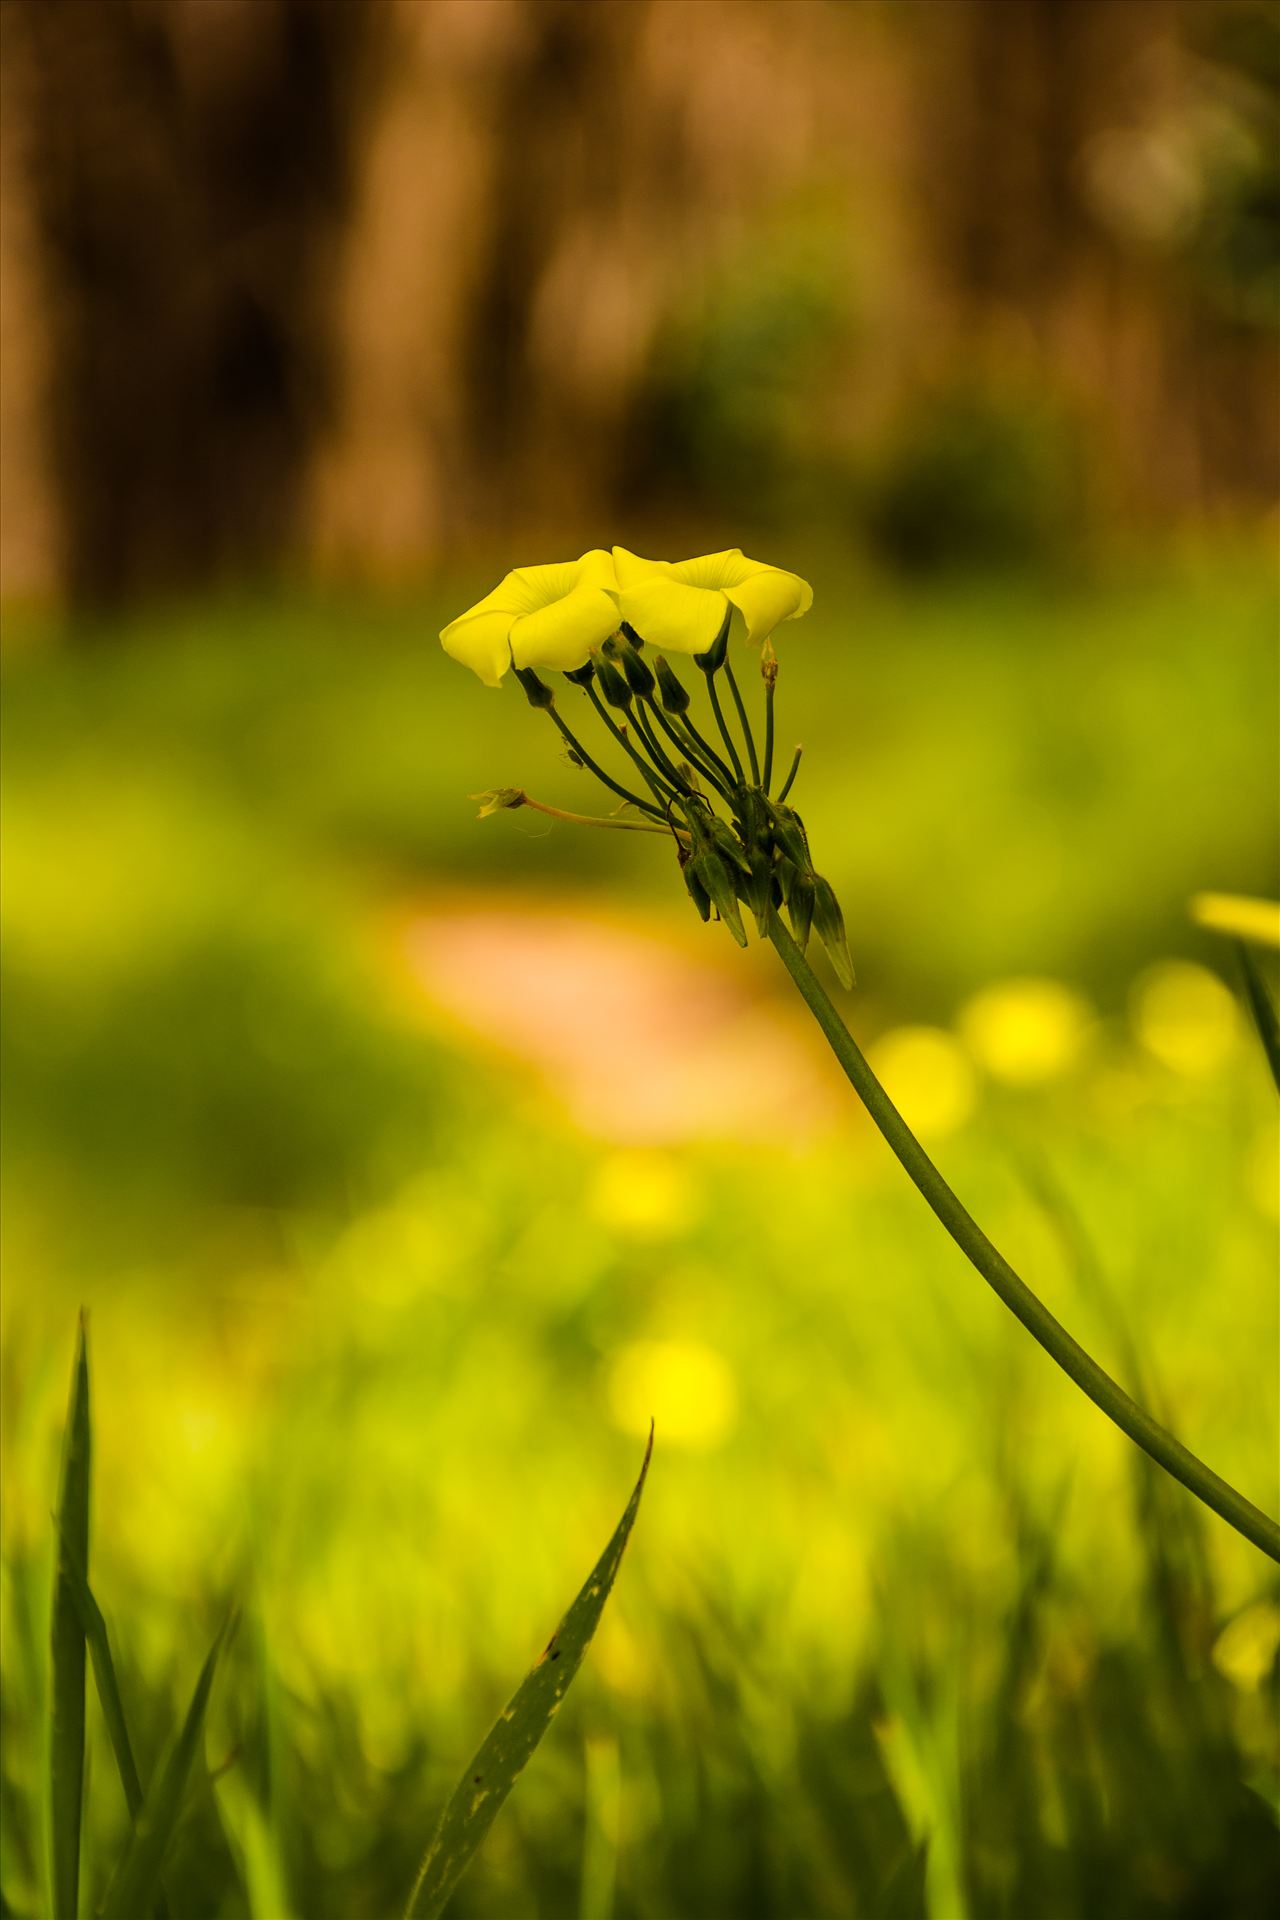 Bright Flower in the Woods.jpg - Bright yellow flower in the woods on California's Central Coast by Sarah Williams